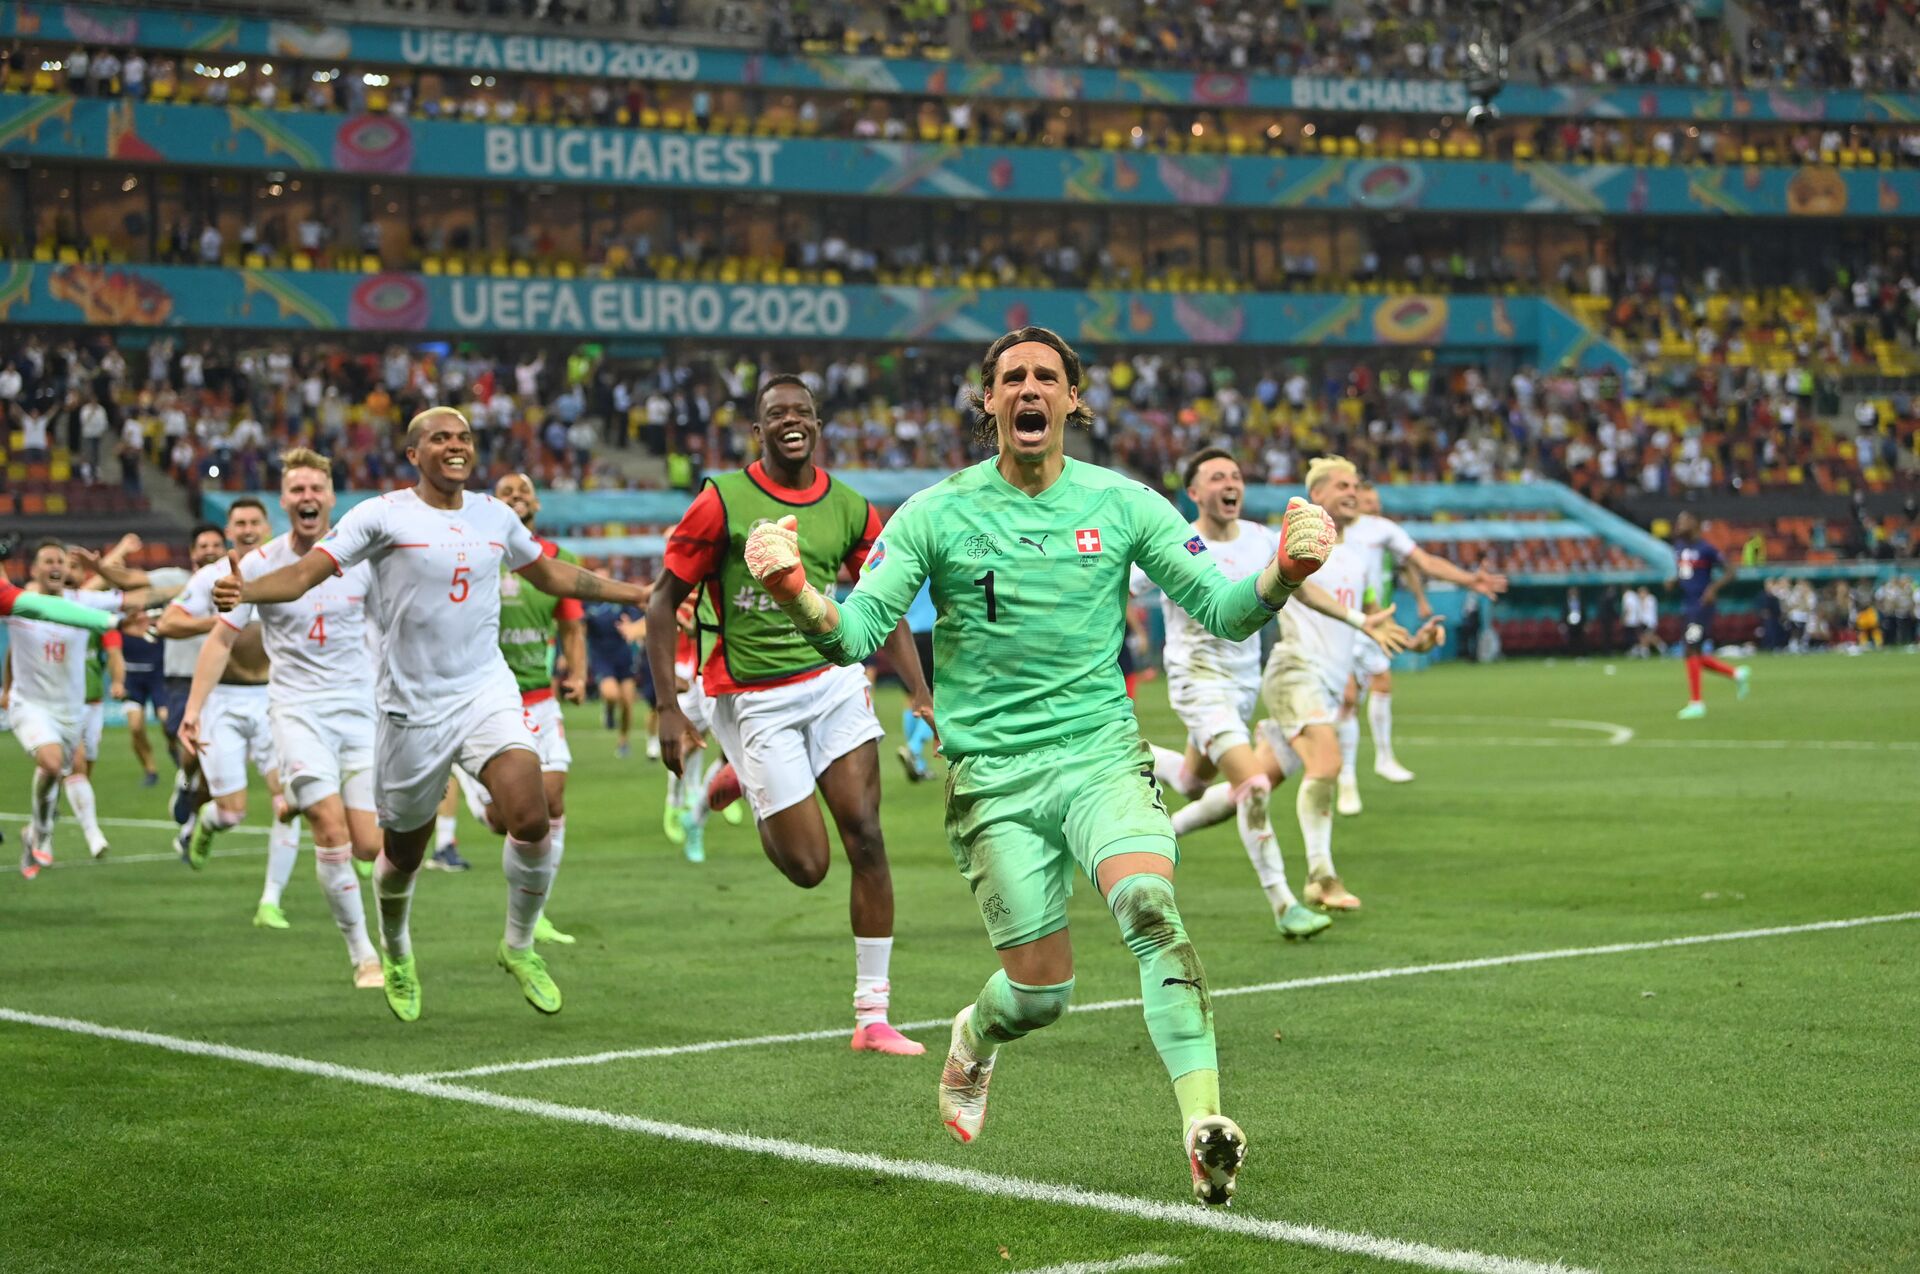 Soccer Football - Euro 2020 - Round of 16 - France v Switzerland - National Arena Bucharest, Bucharest, Romania - June 29, 2021   Switzerland's Yann Sommer celebrates after saving a penalty from France's Kylian Mbappe to win the shoot-out  - Sputnik International, 1920, 07.09.2021